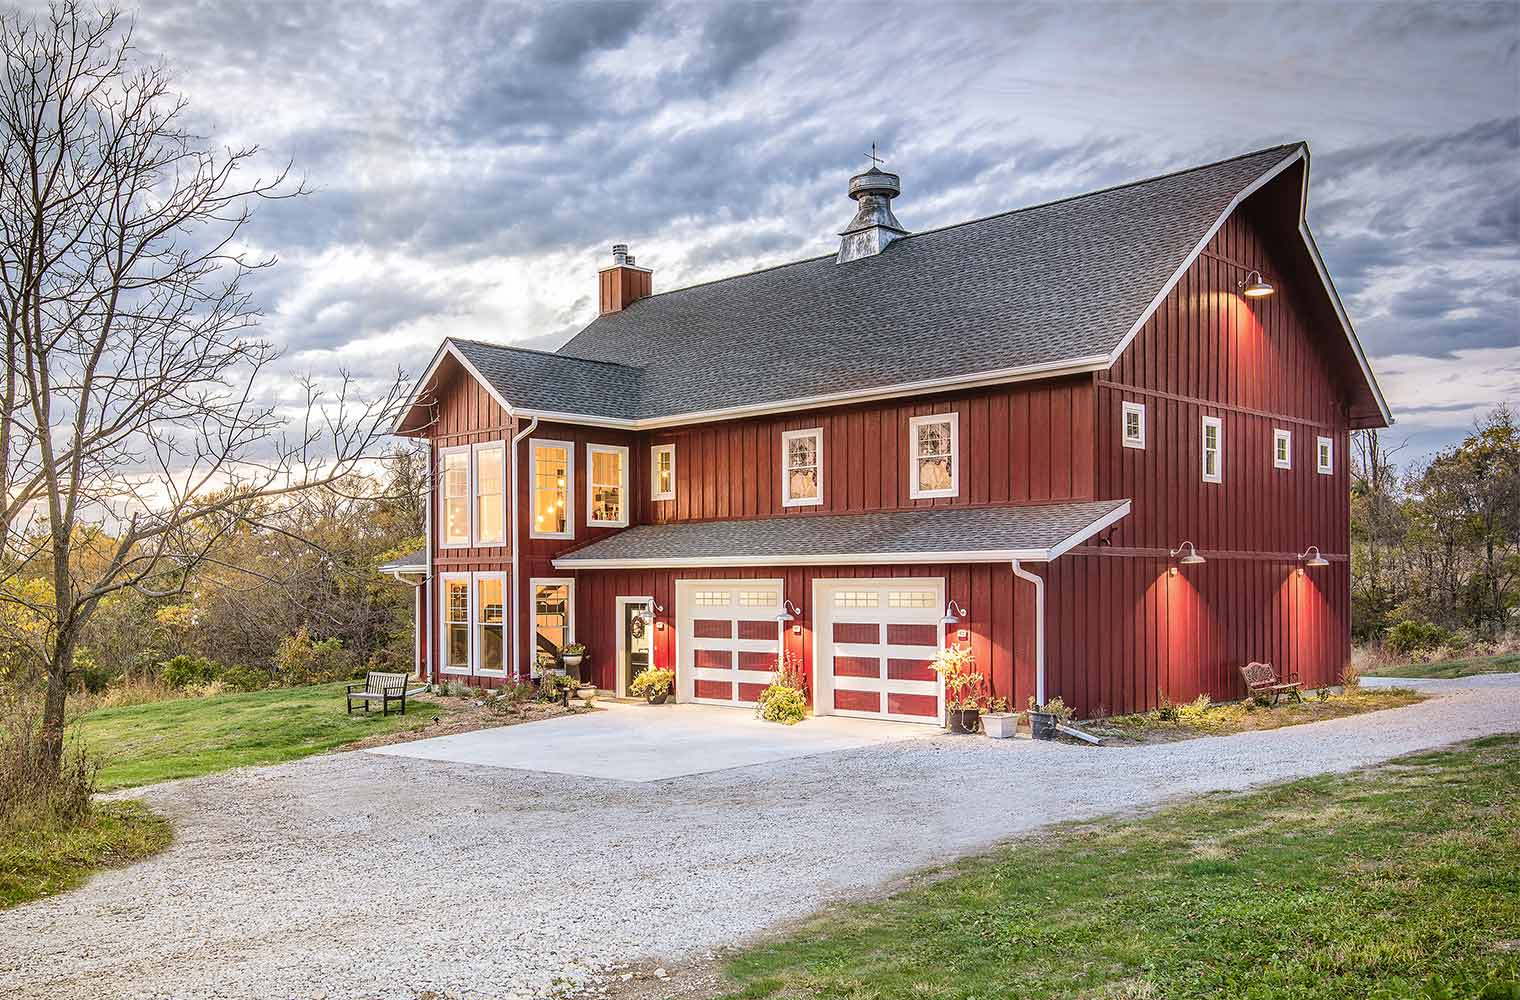 Custom new home designed to look like a barn in rural St. Charles,Iowa, built by Silent Rivers design+build of Des Moines